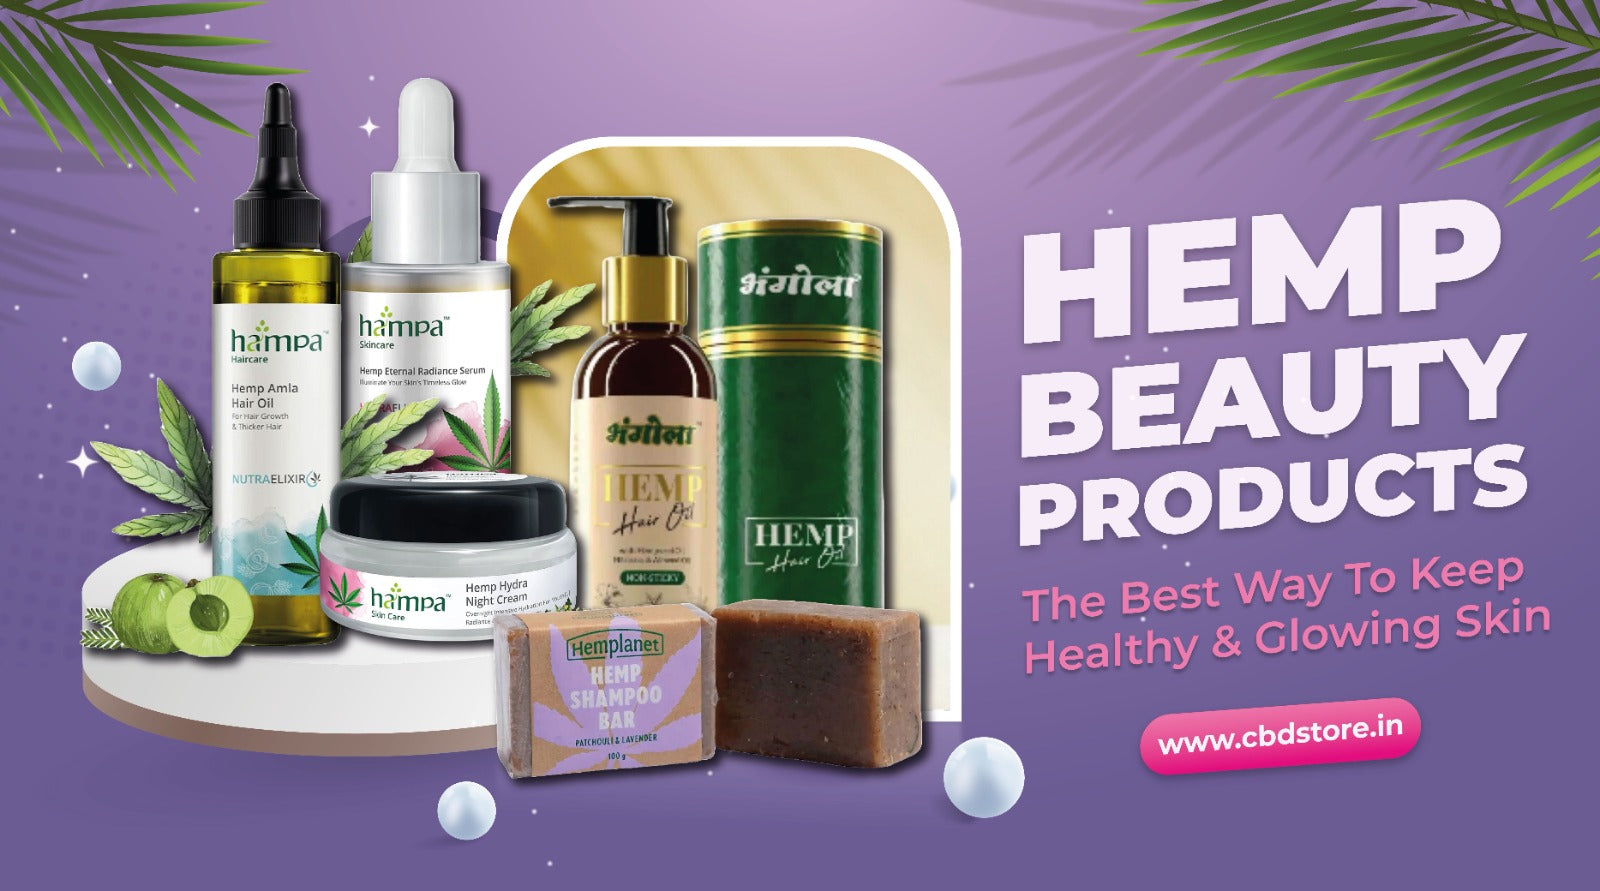 HEMP BEAUTY PRODUCTS- The best way to keep healthy and glowing skin - CBD Store India